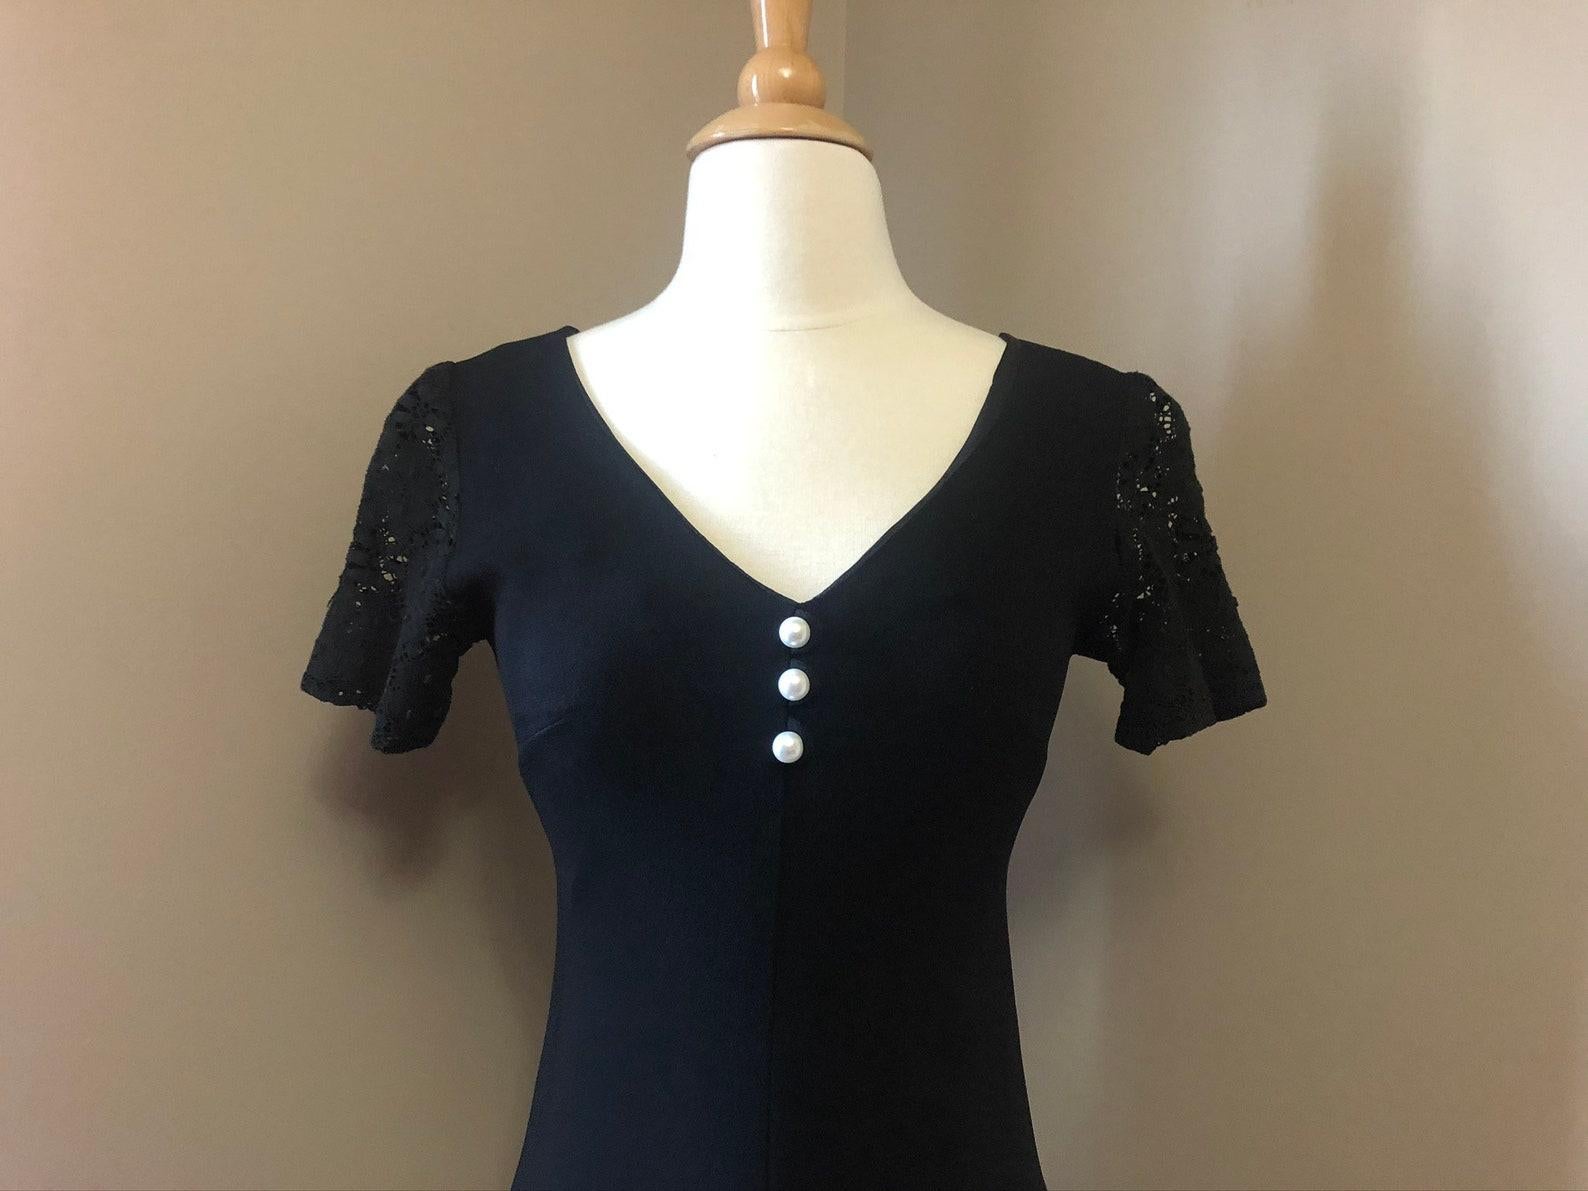 Radley of London Black Mini Dress, Circa 1960s In Excellent Condition For Sale In Brooklyn, NY